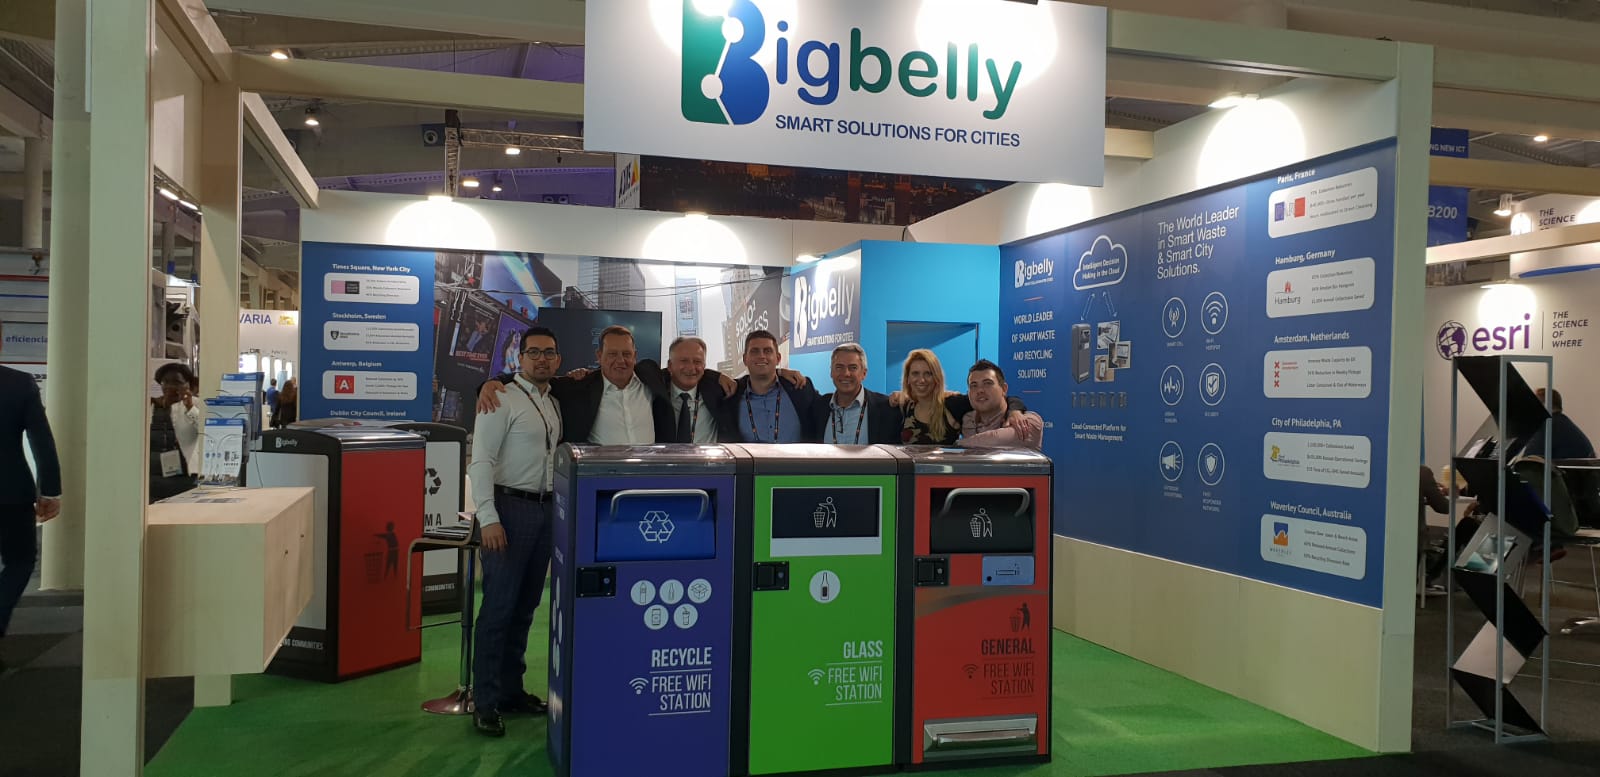 Bigbelly Future Street at Smart City Expo and World Congress 2018